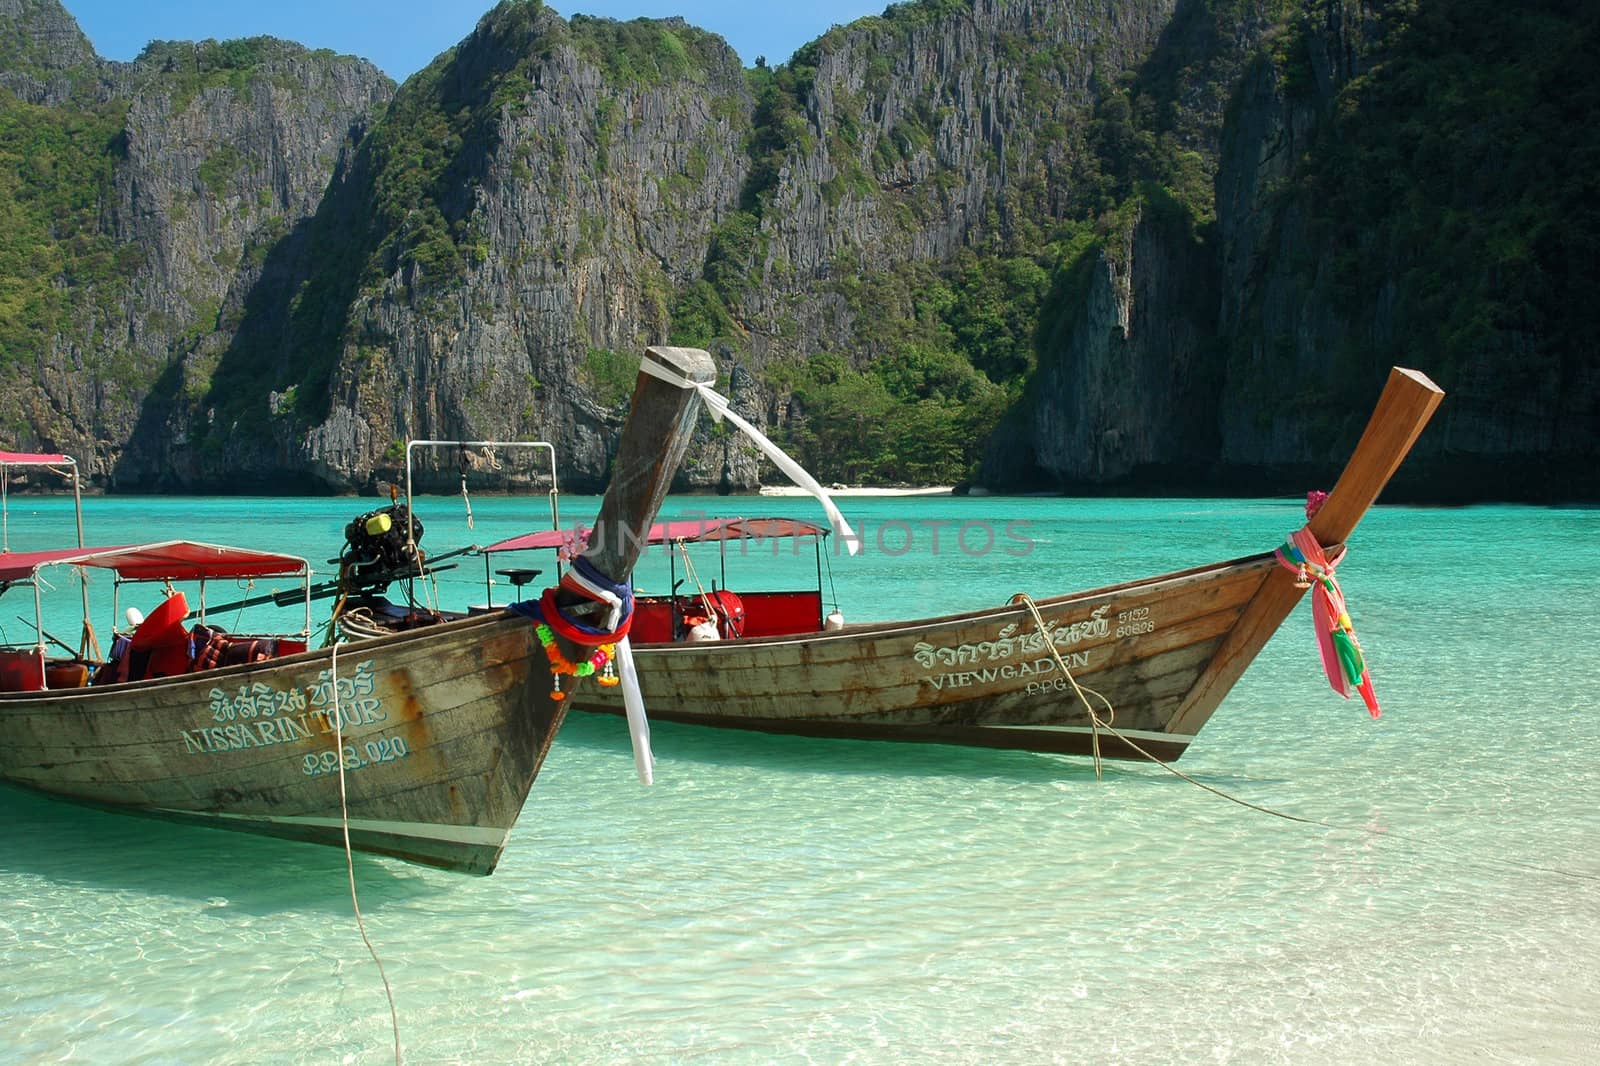 Maya Bay, in Thailand, also know as 'The Beach'